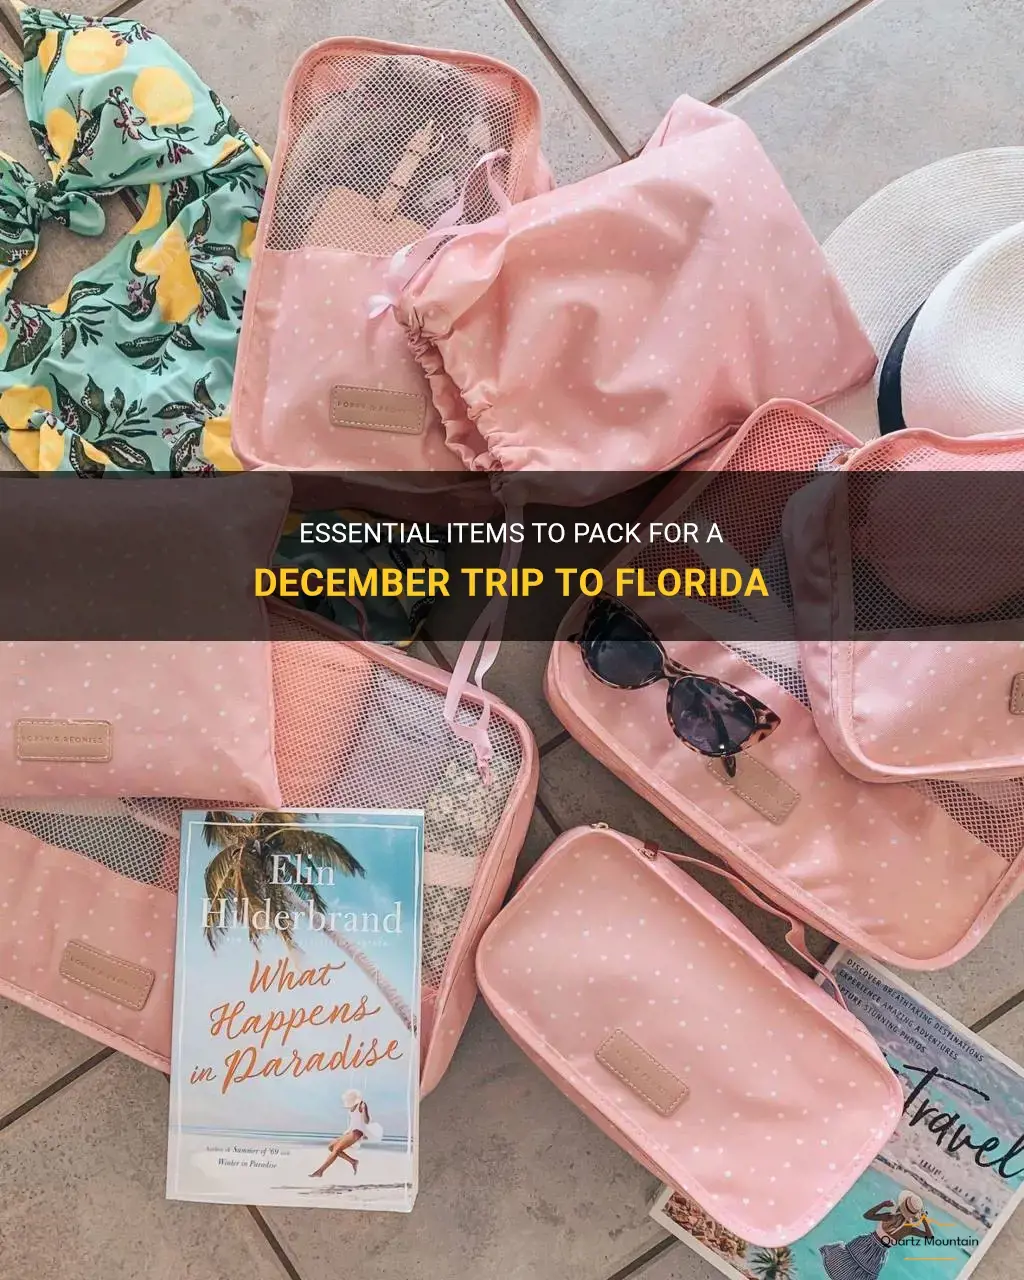 what to pack for trip to florida in december